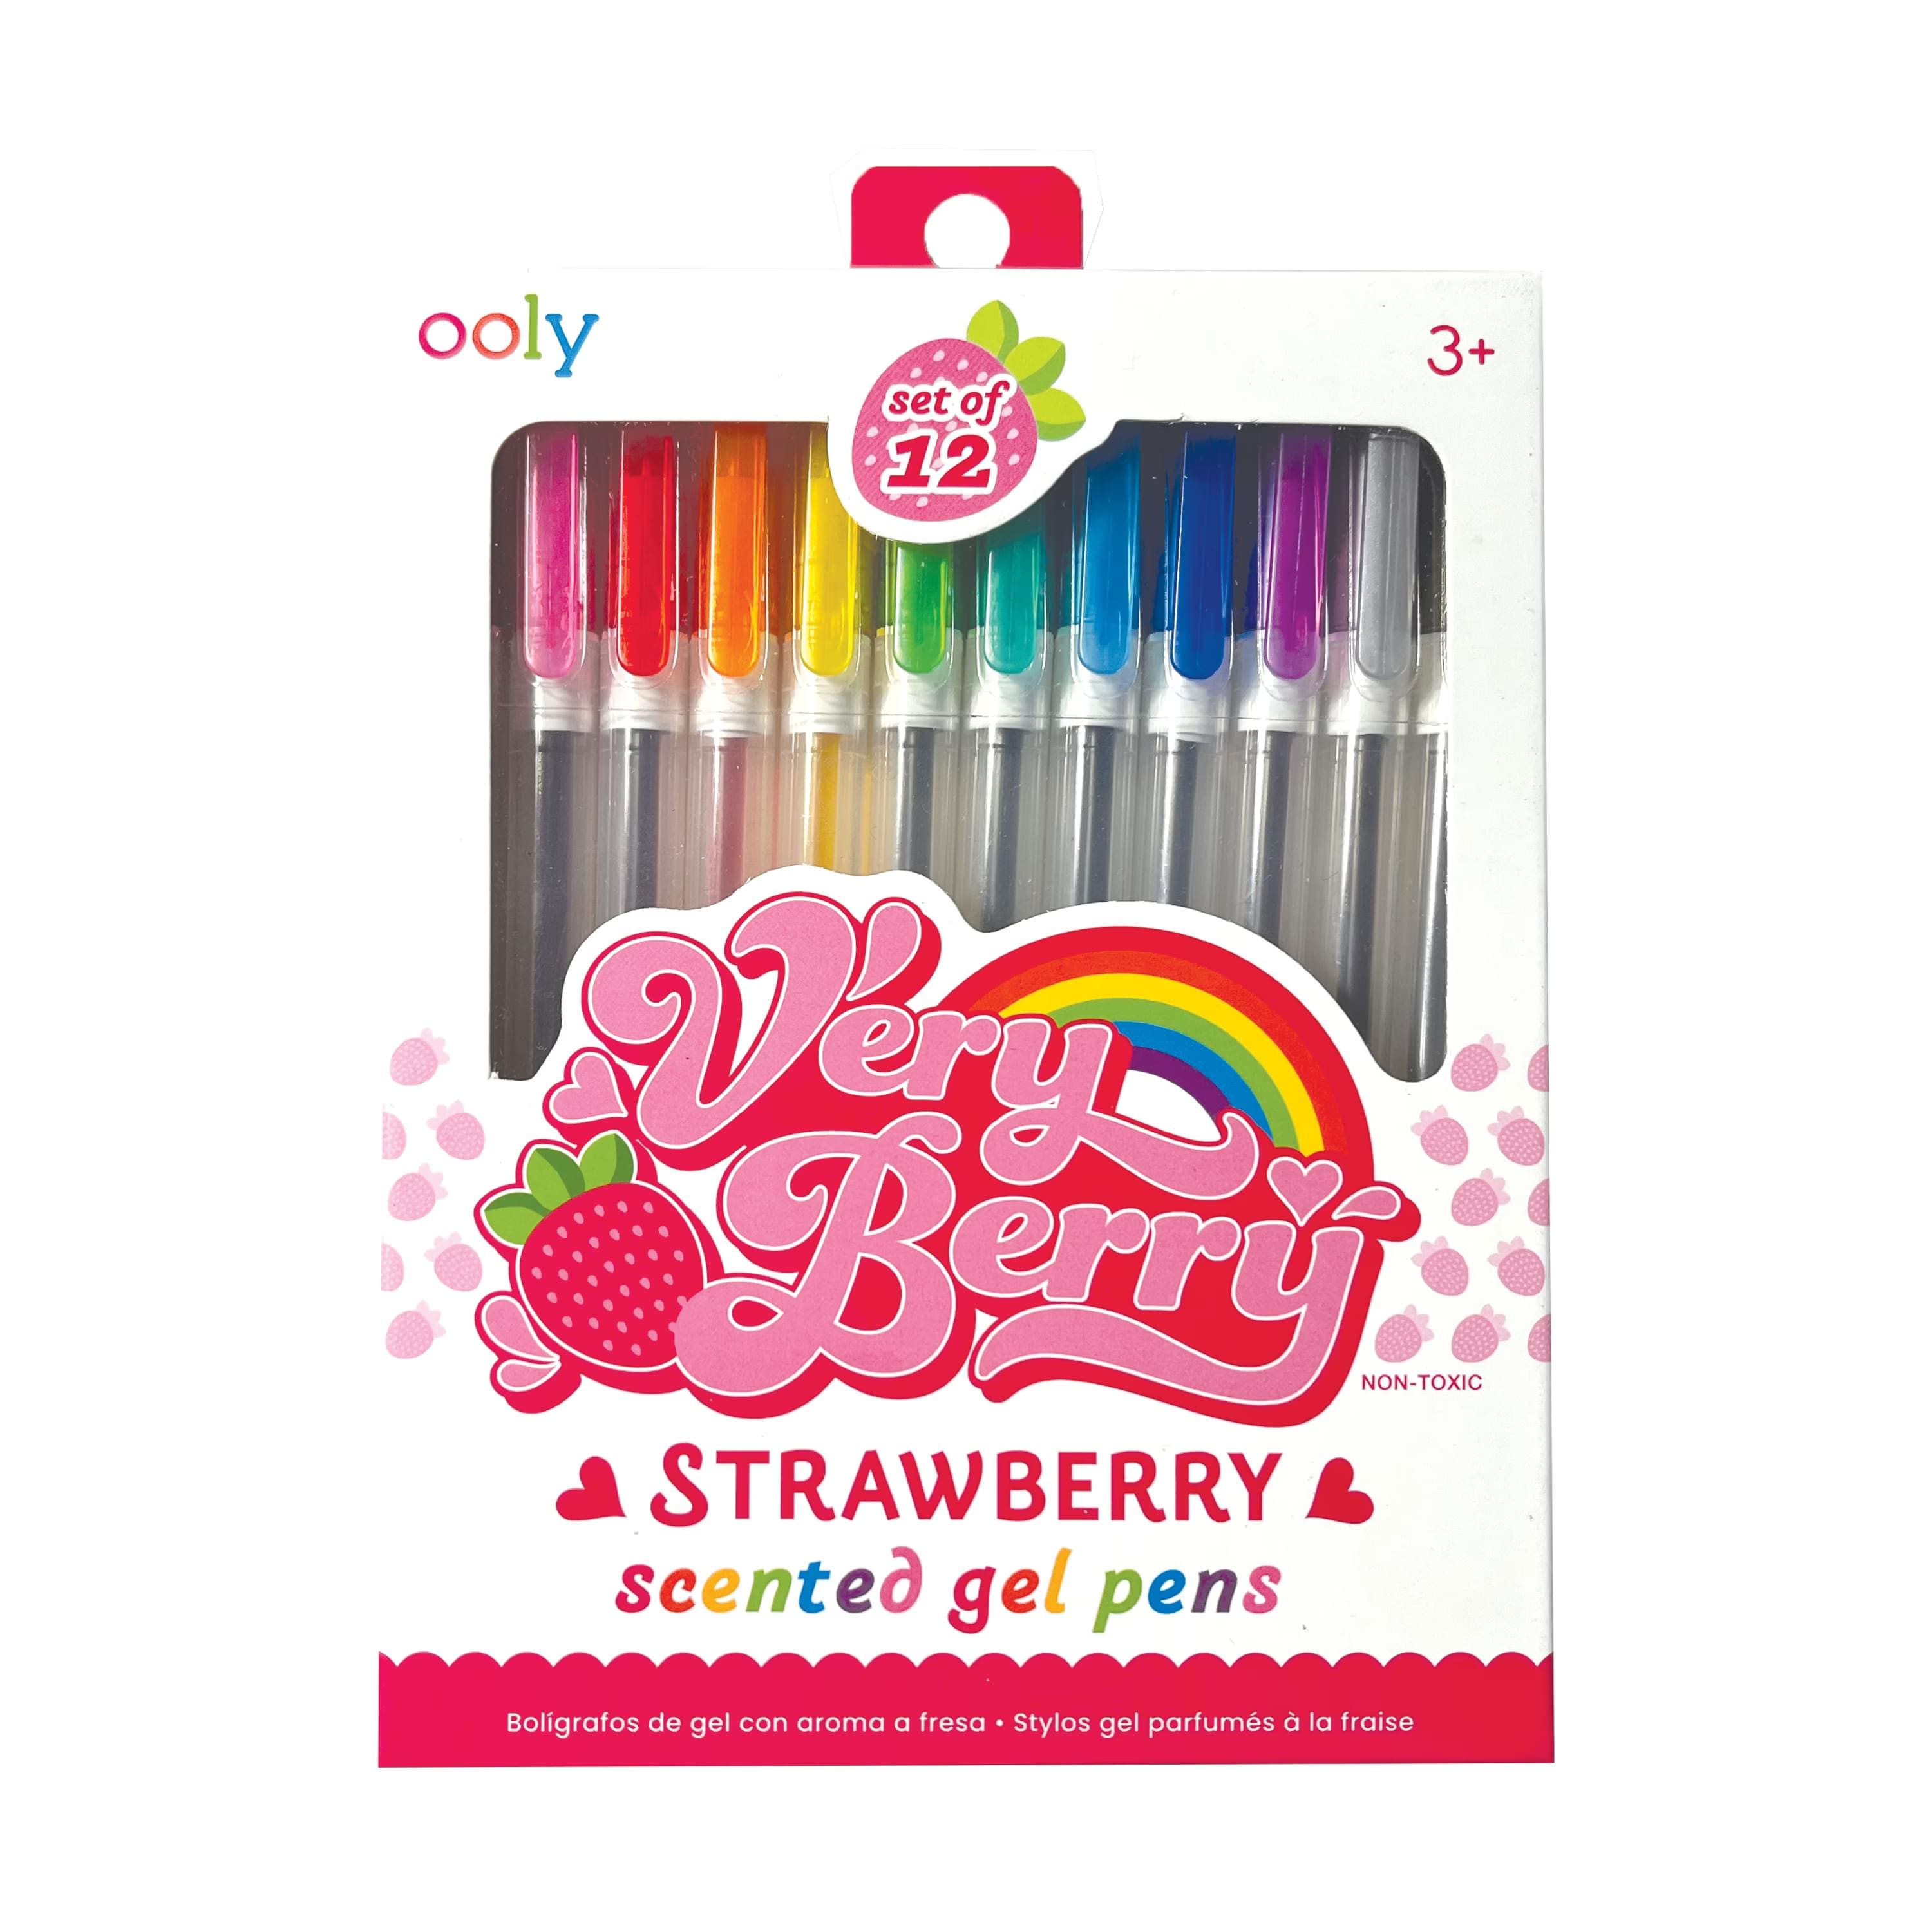 Zulay Kitchen 12 Pieces Dual Colored Outline Pens - Self-Outline Metallic  Markers - Macy's in 2023